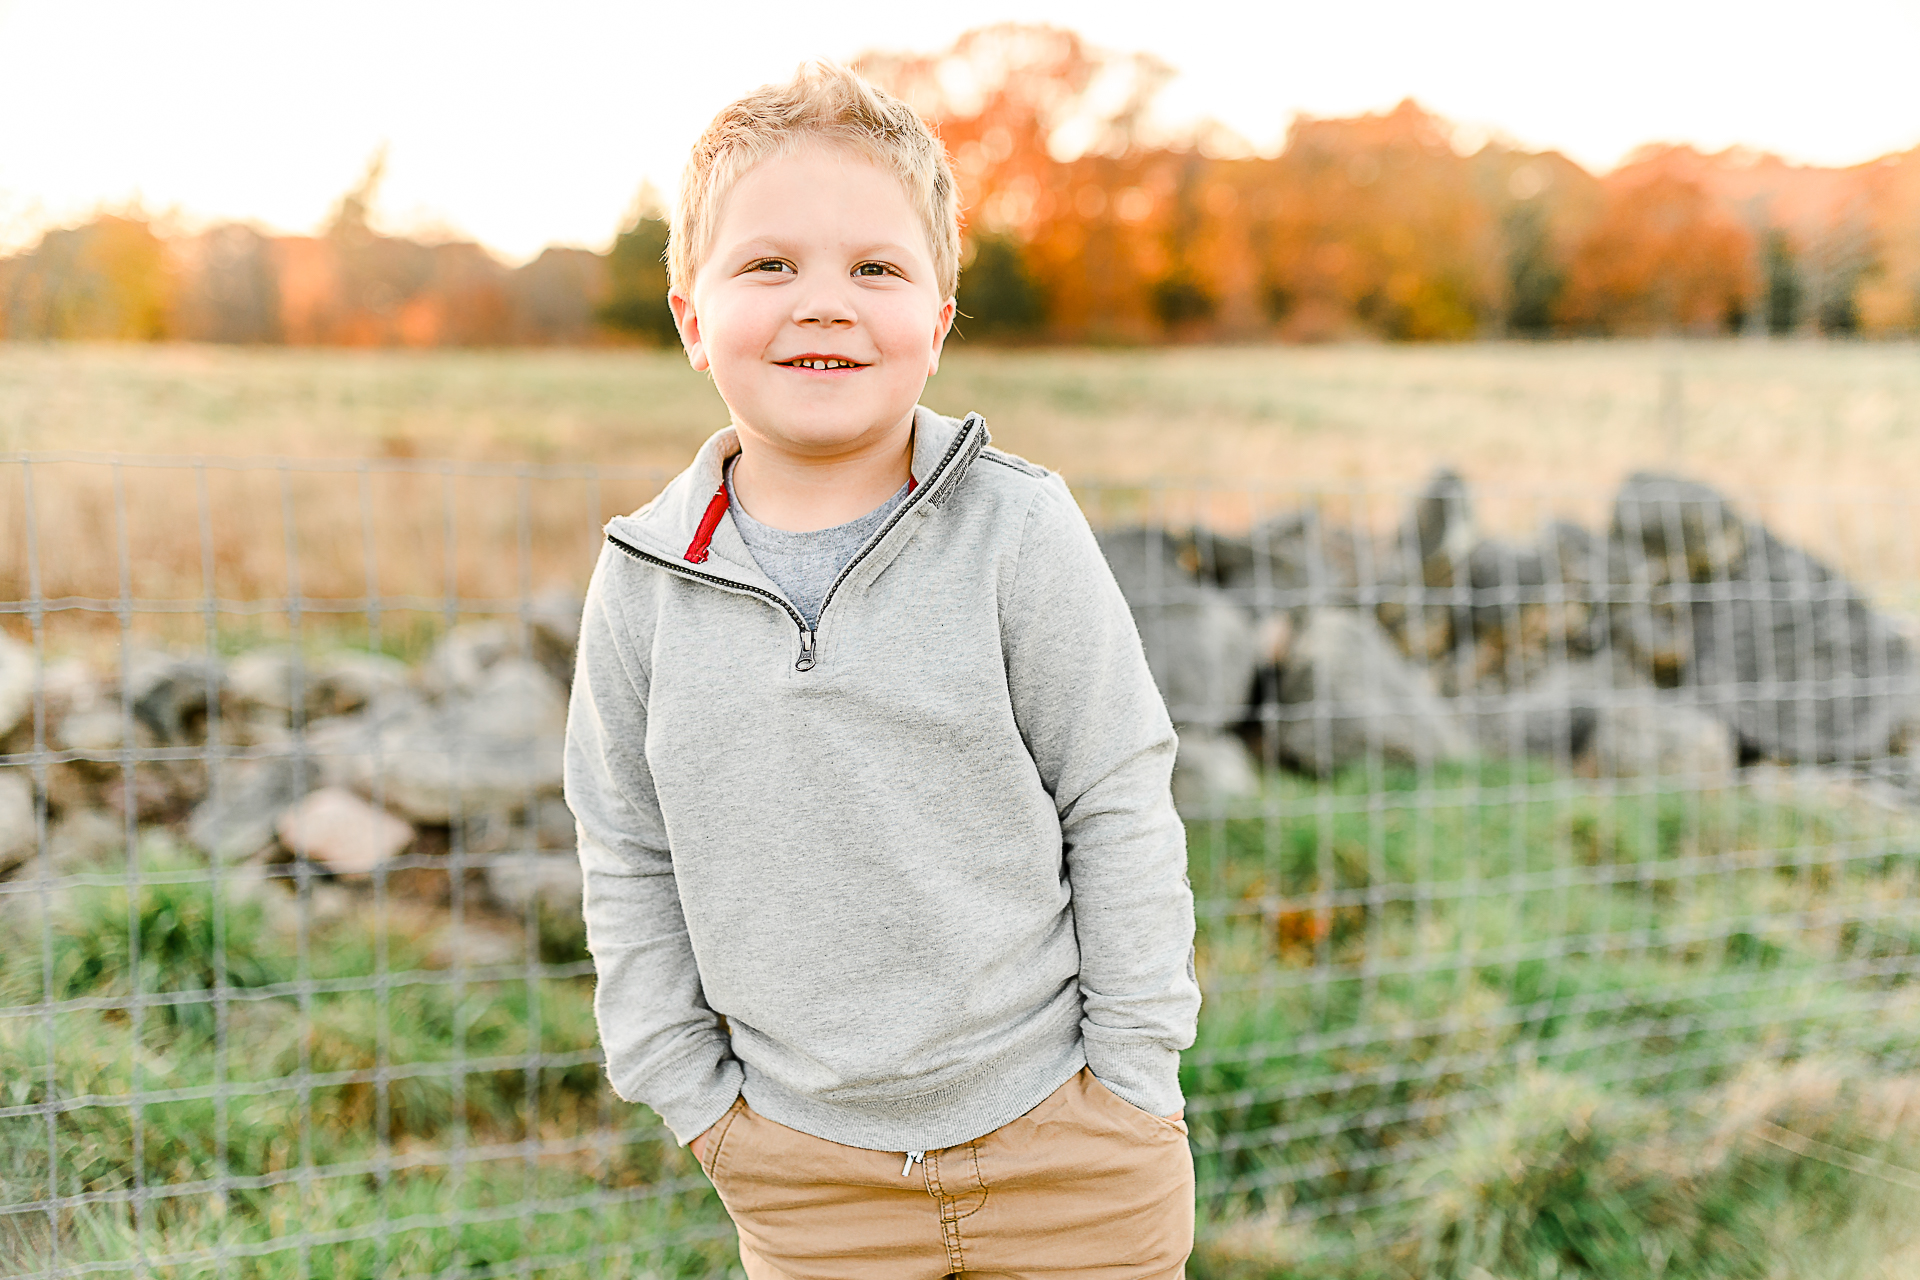 Photo by Norwell Photographer Christina Runnals | Little boy in a field smiling for a photo